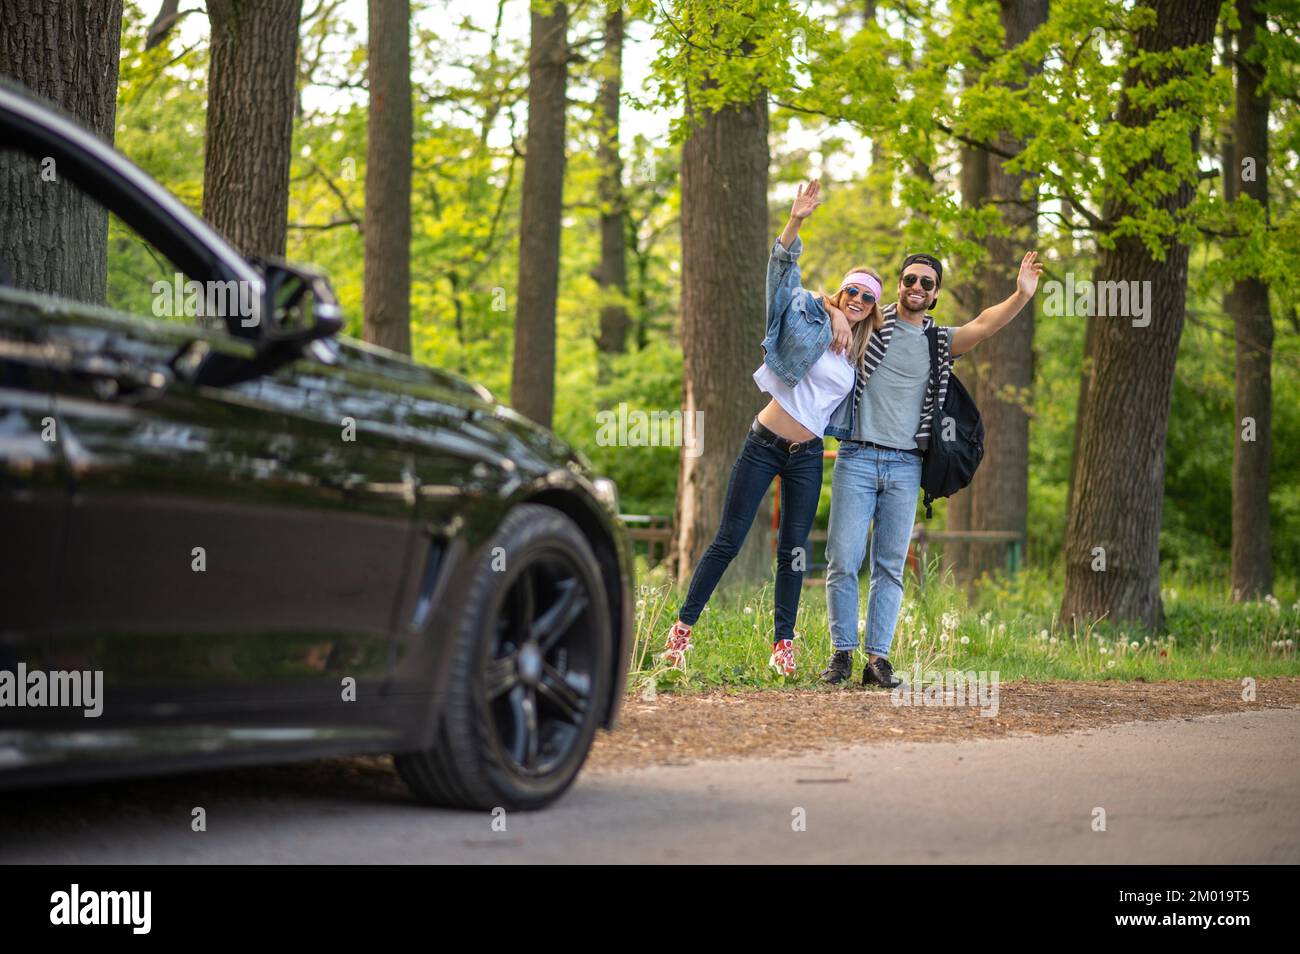 On the way to the city. Young people in the forest stopping the car and looking joyful. Stock Photo